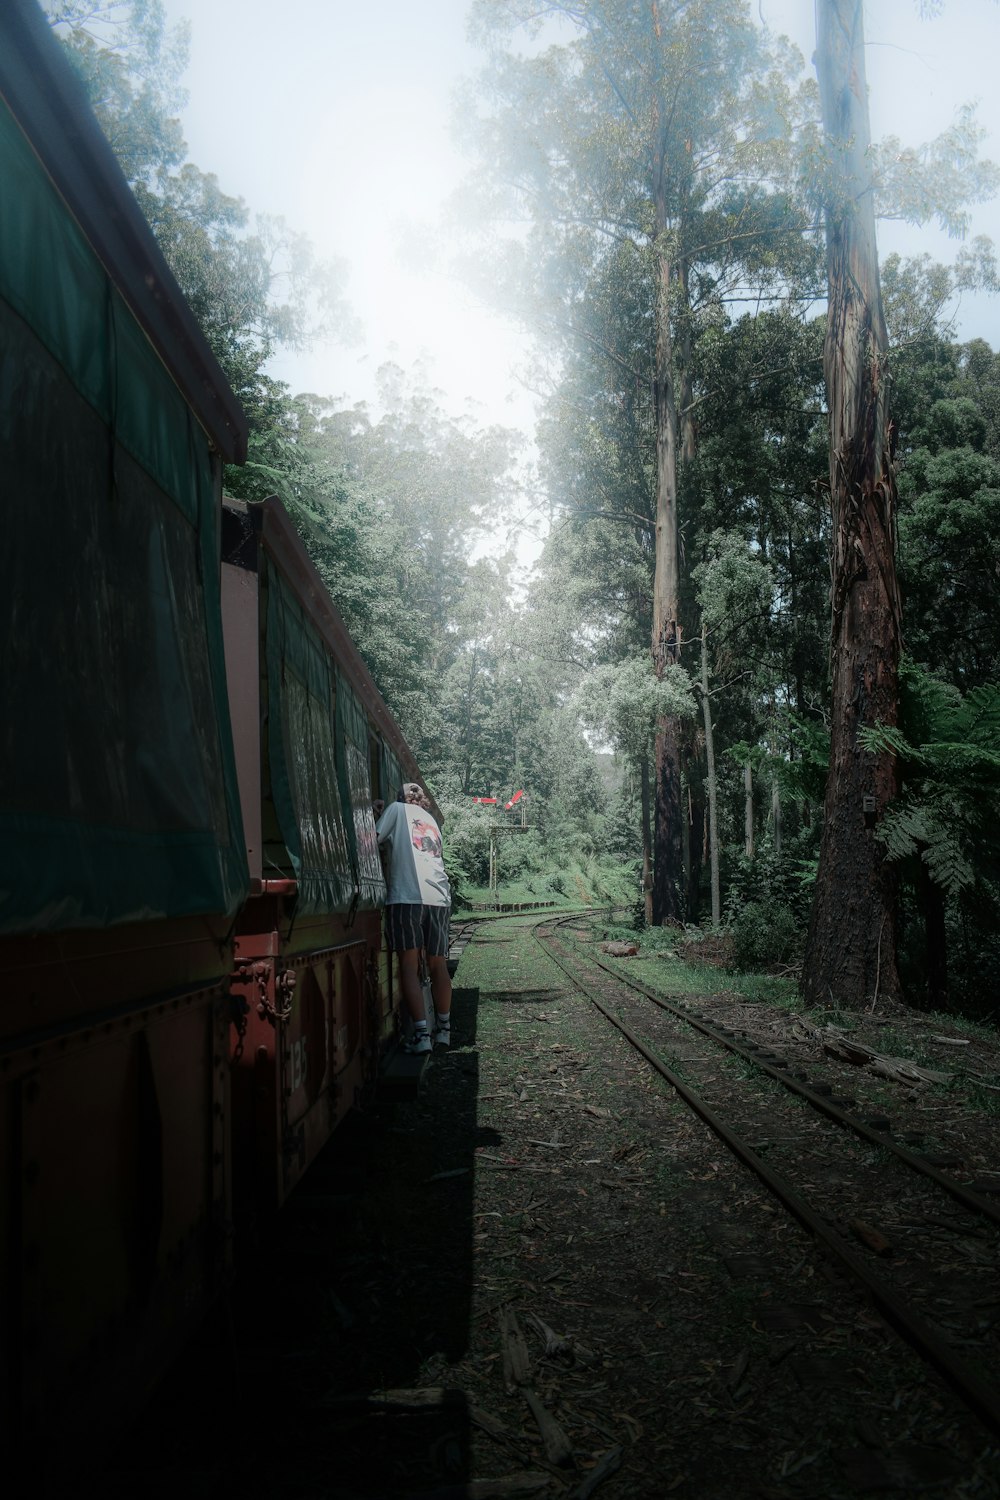 red train in the middle of the forest